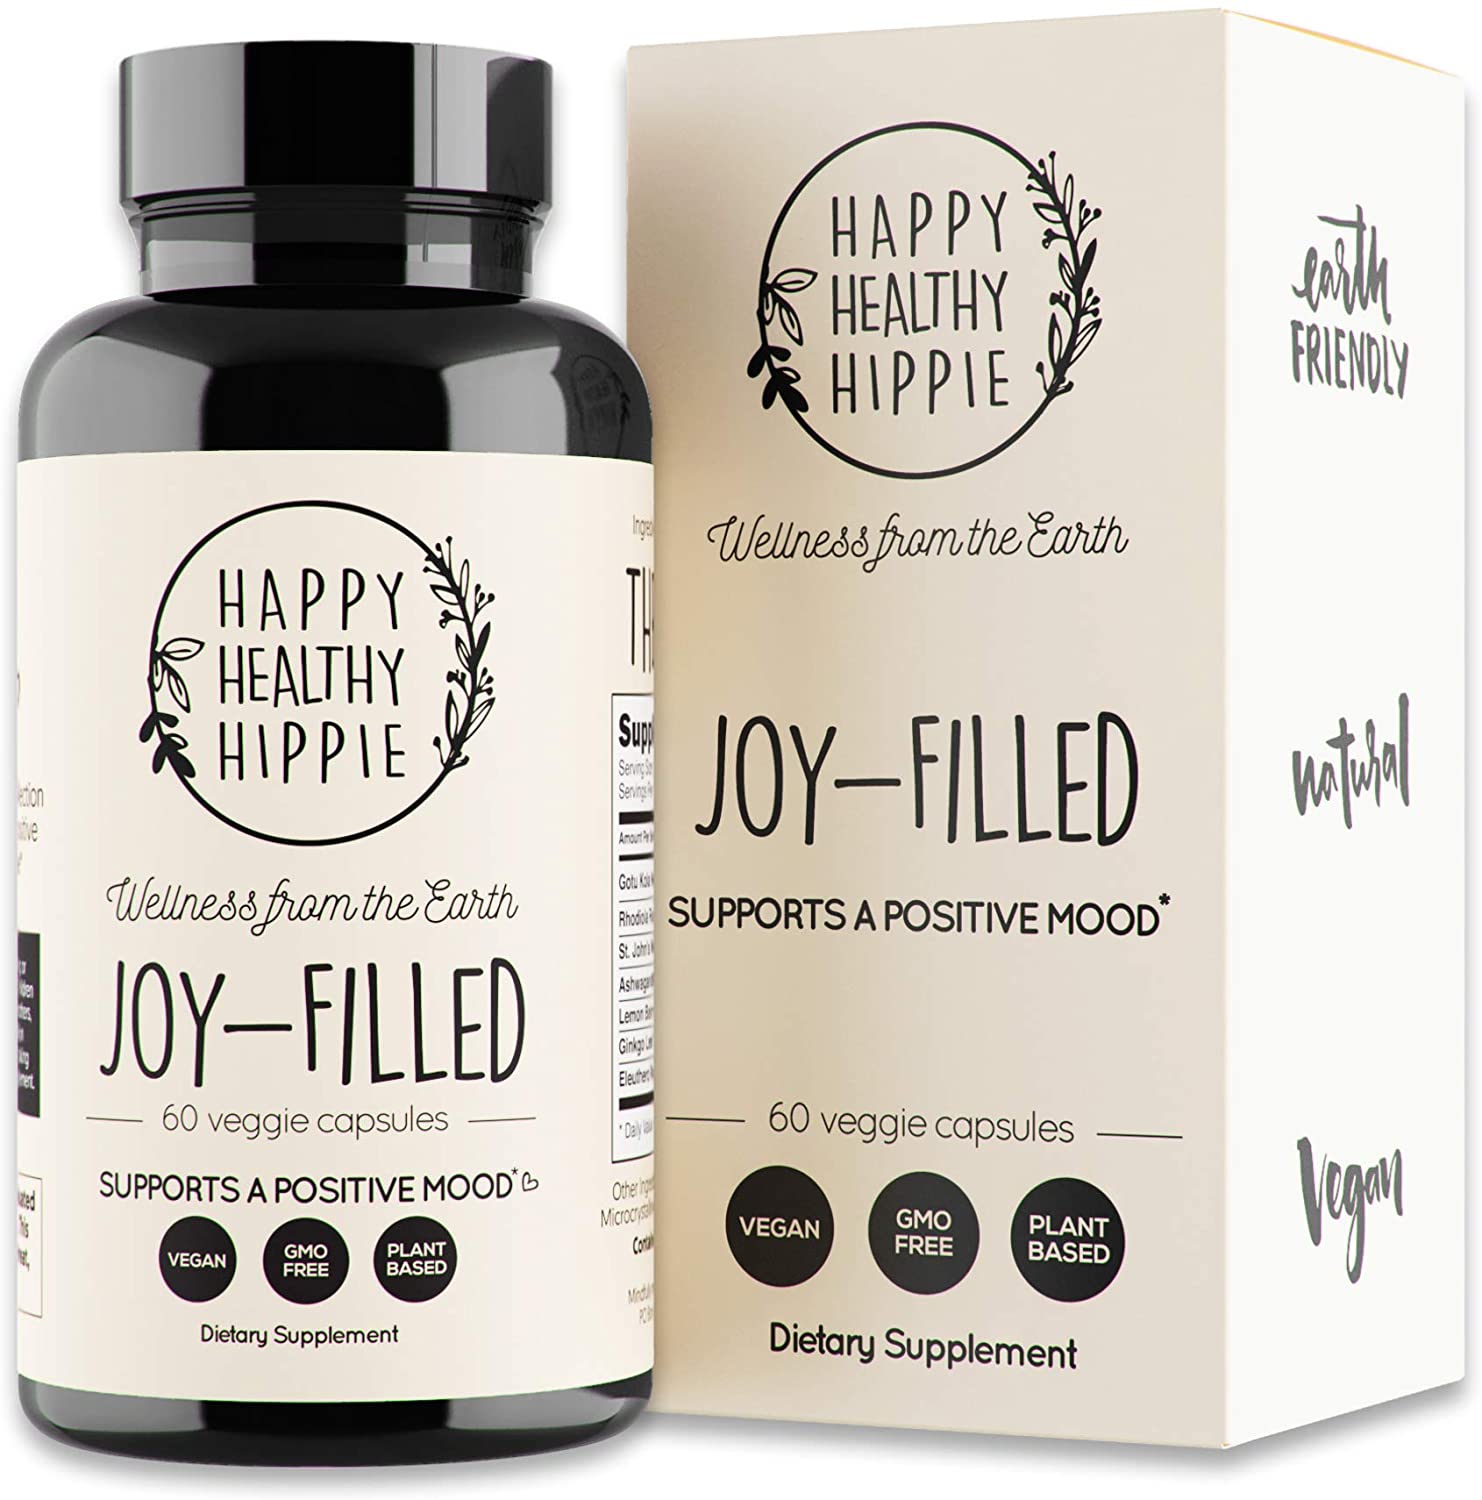 Joy-Filled - Helps Relax The Mind and Body, Boosts Mood, Relieves Tension & Worries 